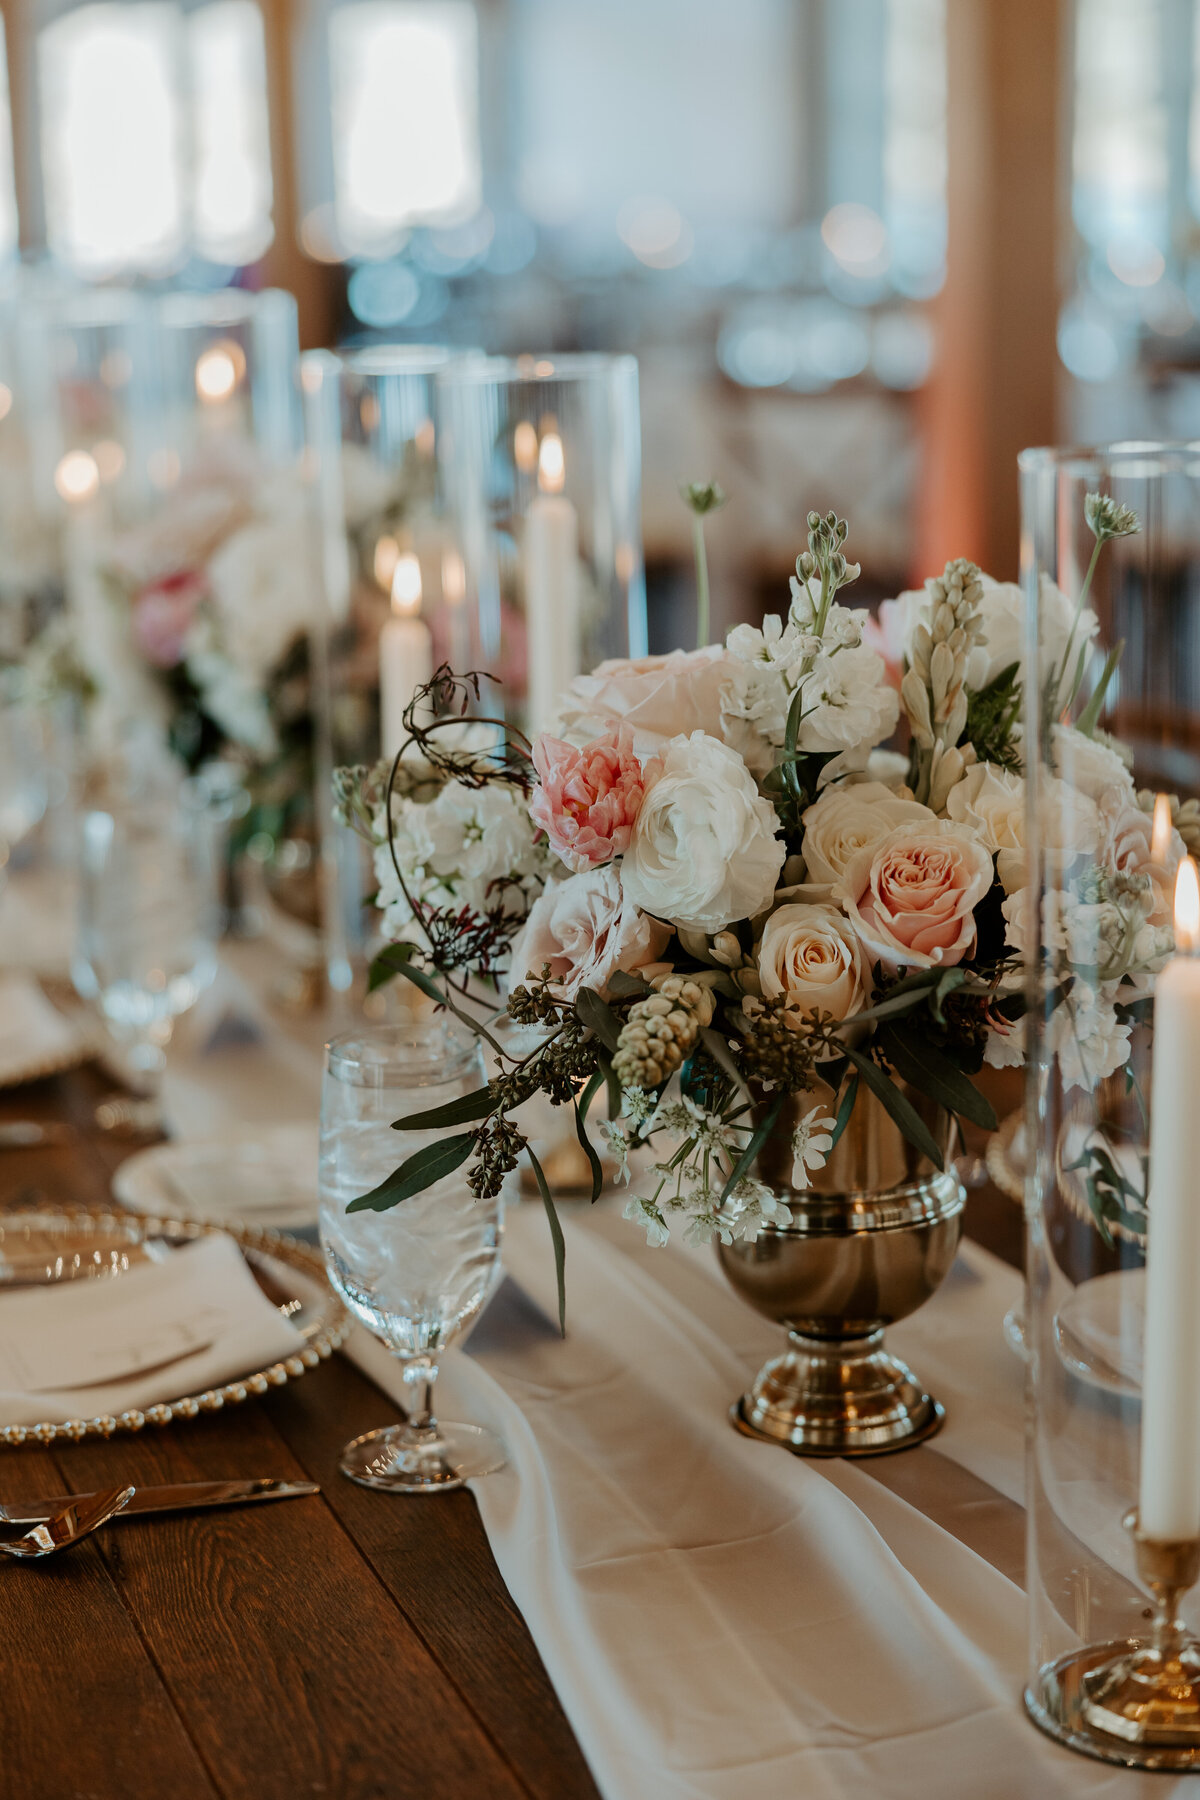 Blush and cream florals in a gold container on farm table